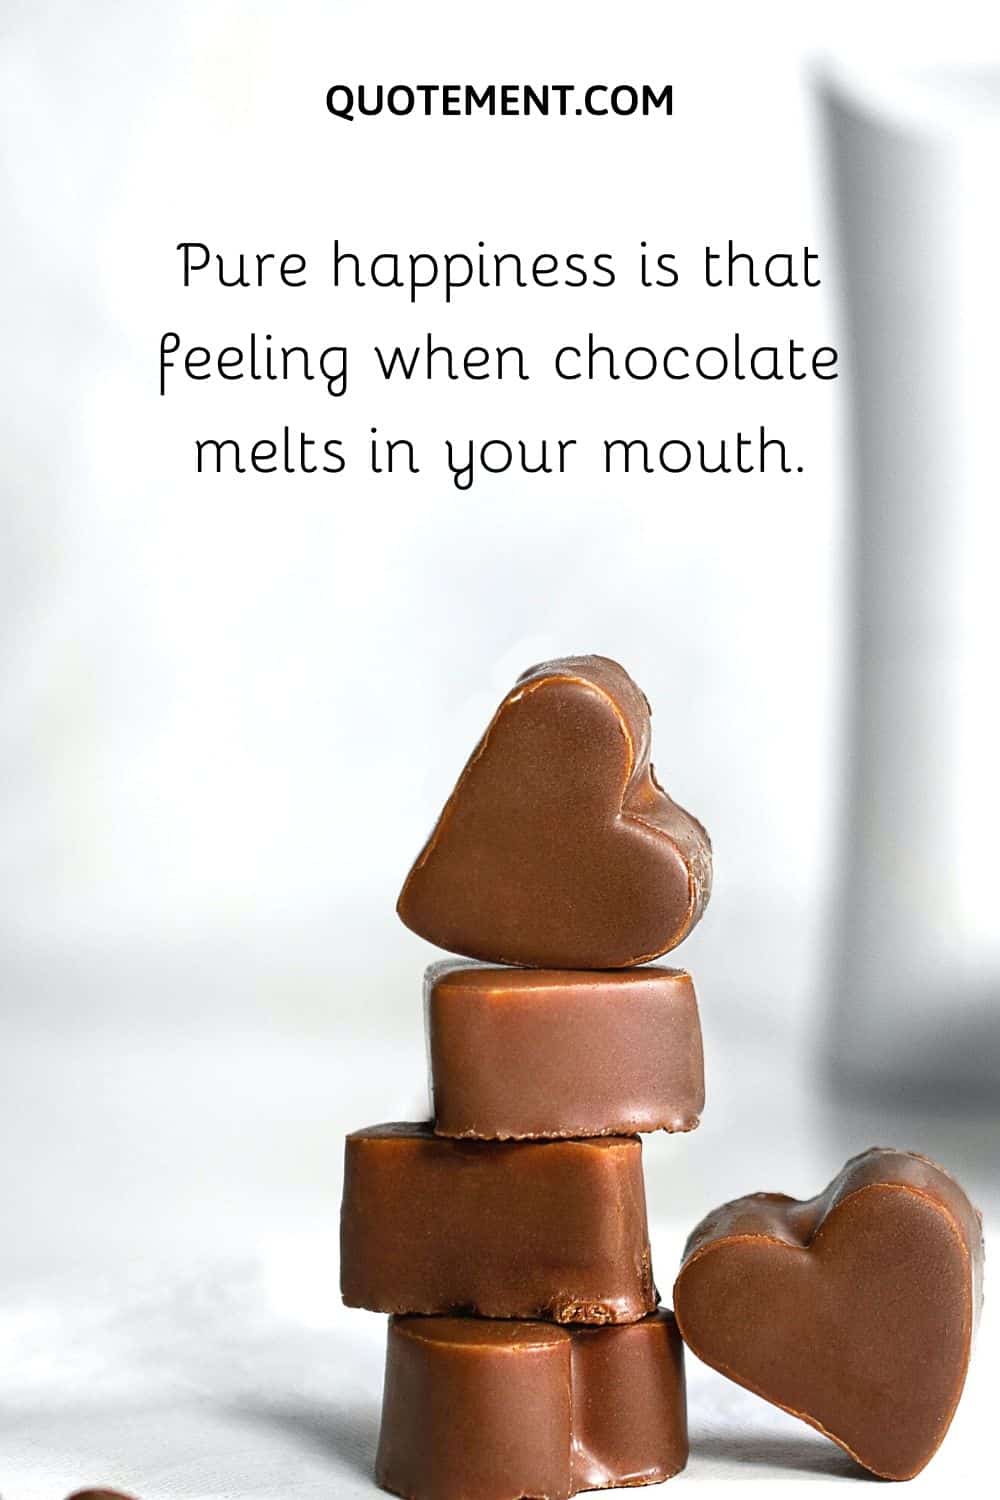 Pure happiness is that feeling when chocolate melts in your mouth.